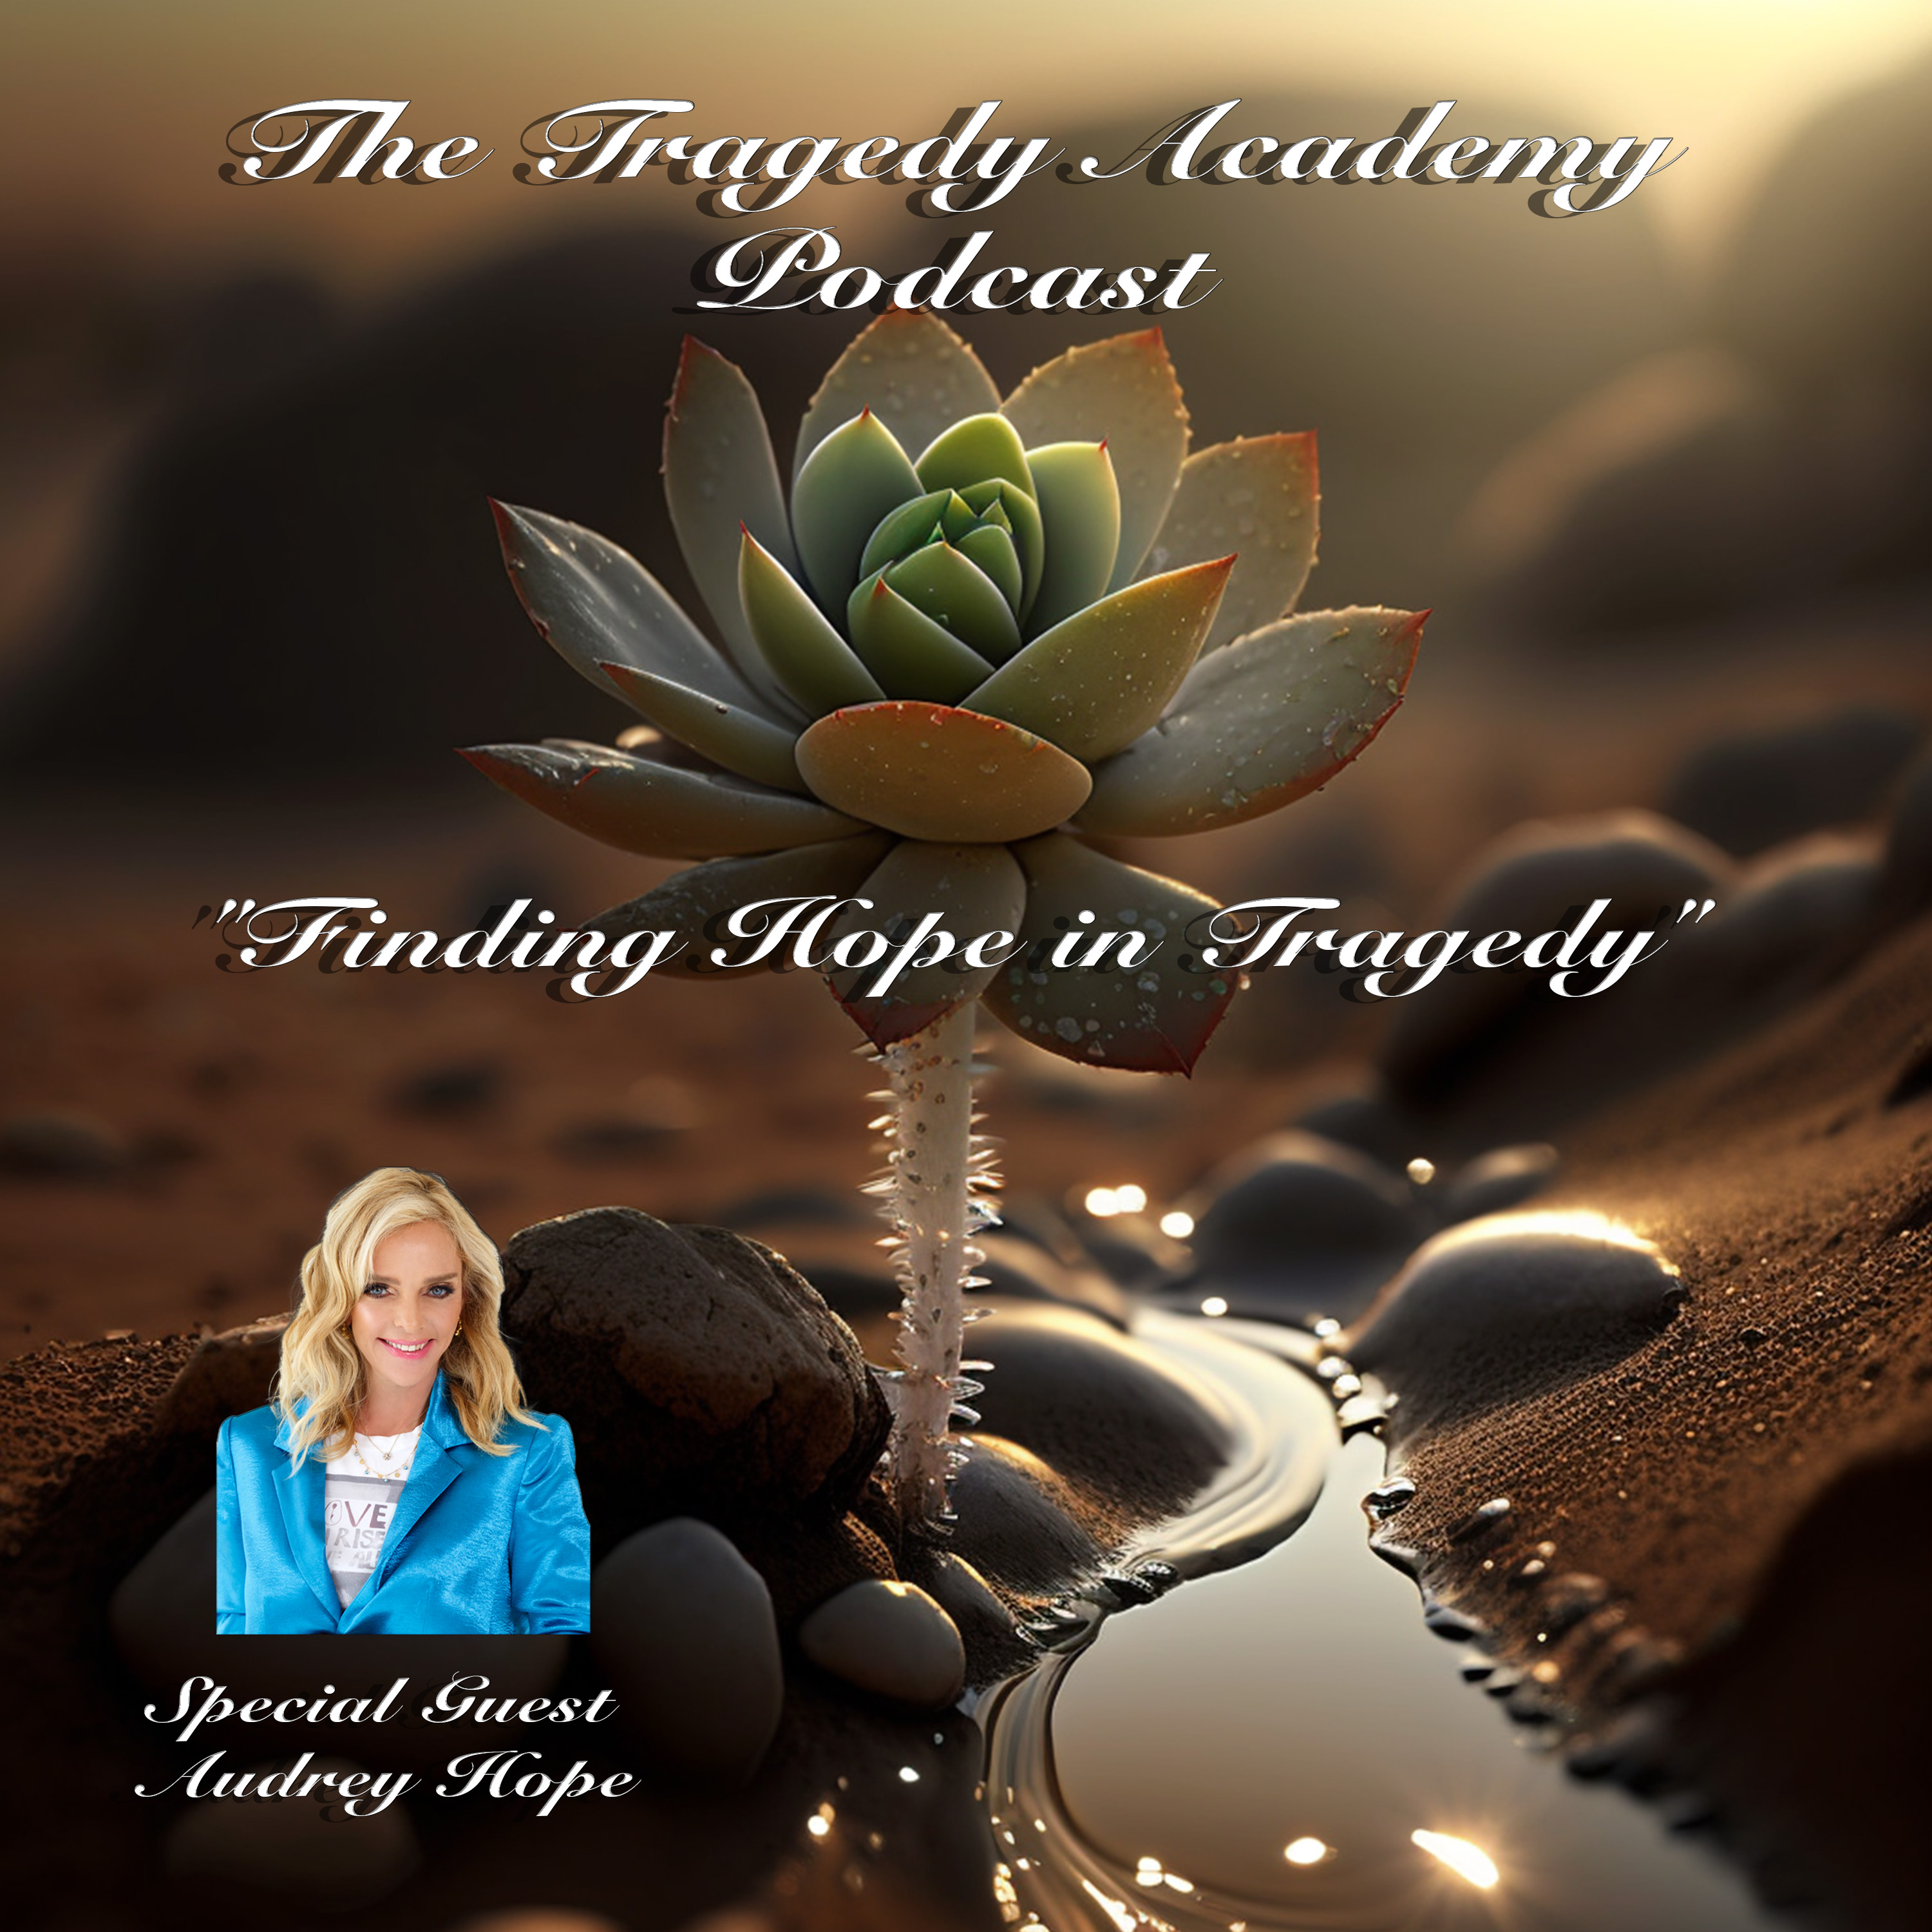 "Finding Hope in Tragedy" with Audrey Hope